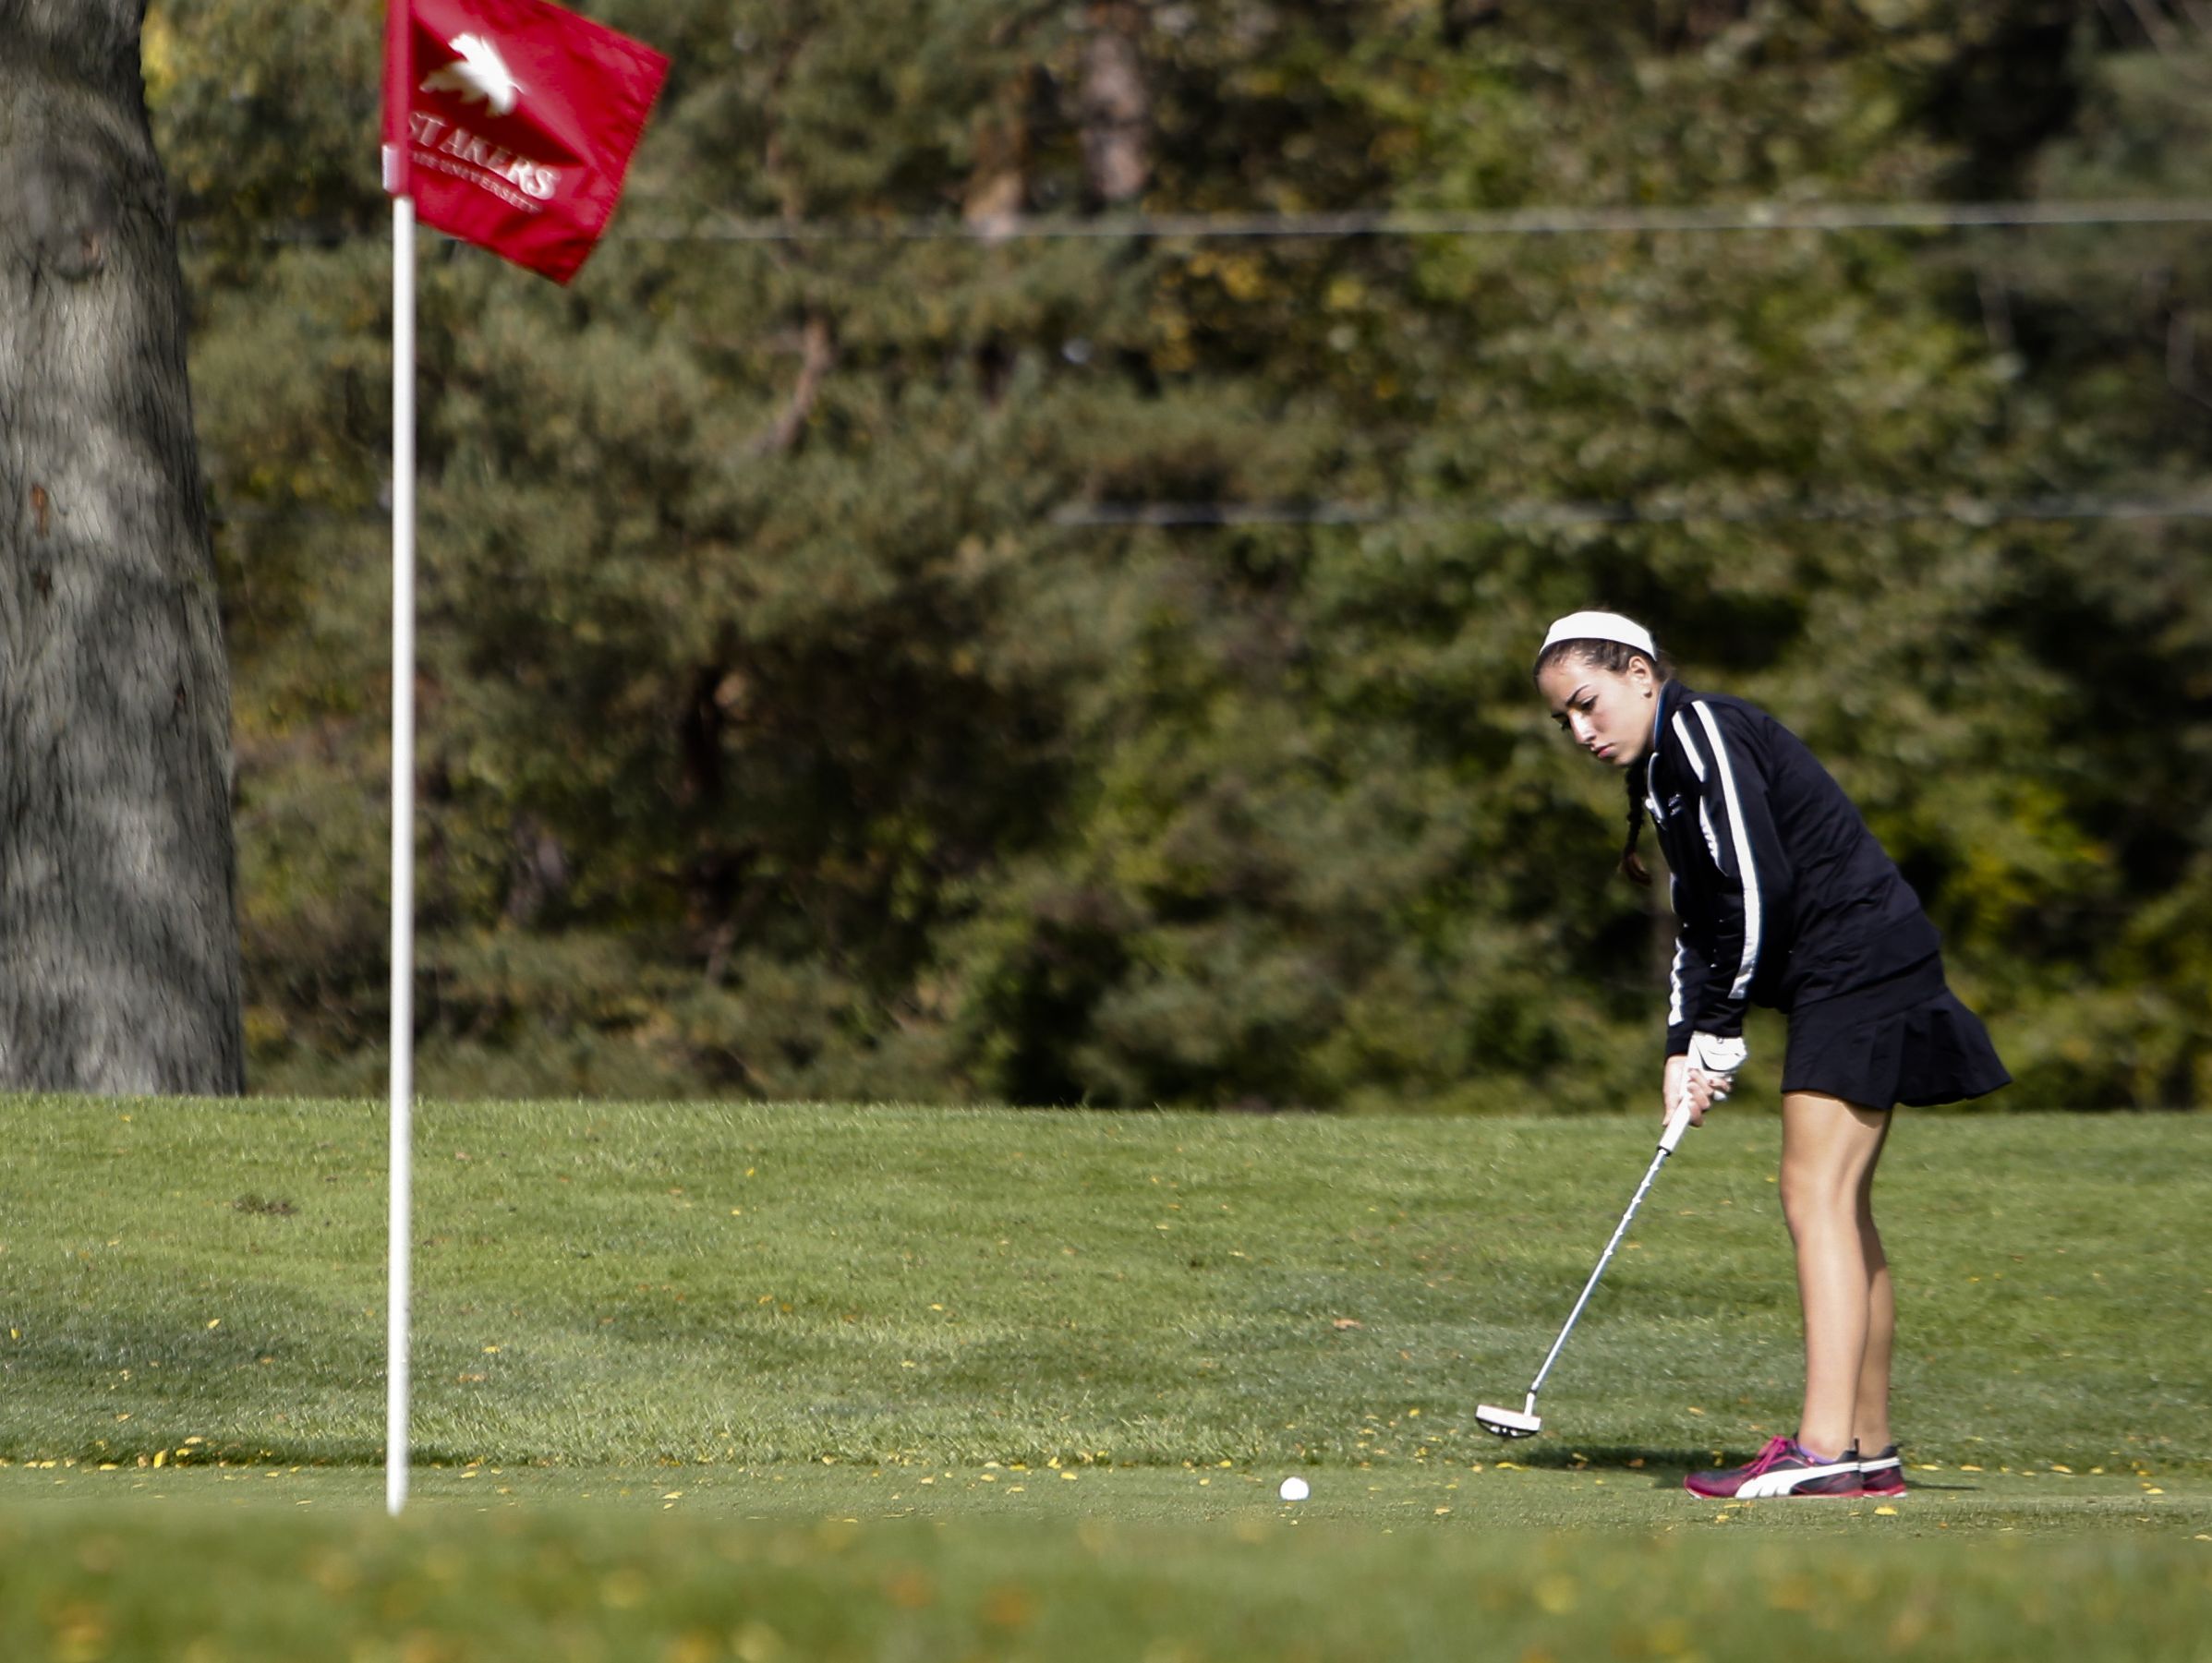 Lansing Catholic senior Alyssa Rodriguez putts on the seventh green during the Div. 4 Girls Golf Finals October 15, 2016, at Forest Akers West at Michigan State University.